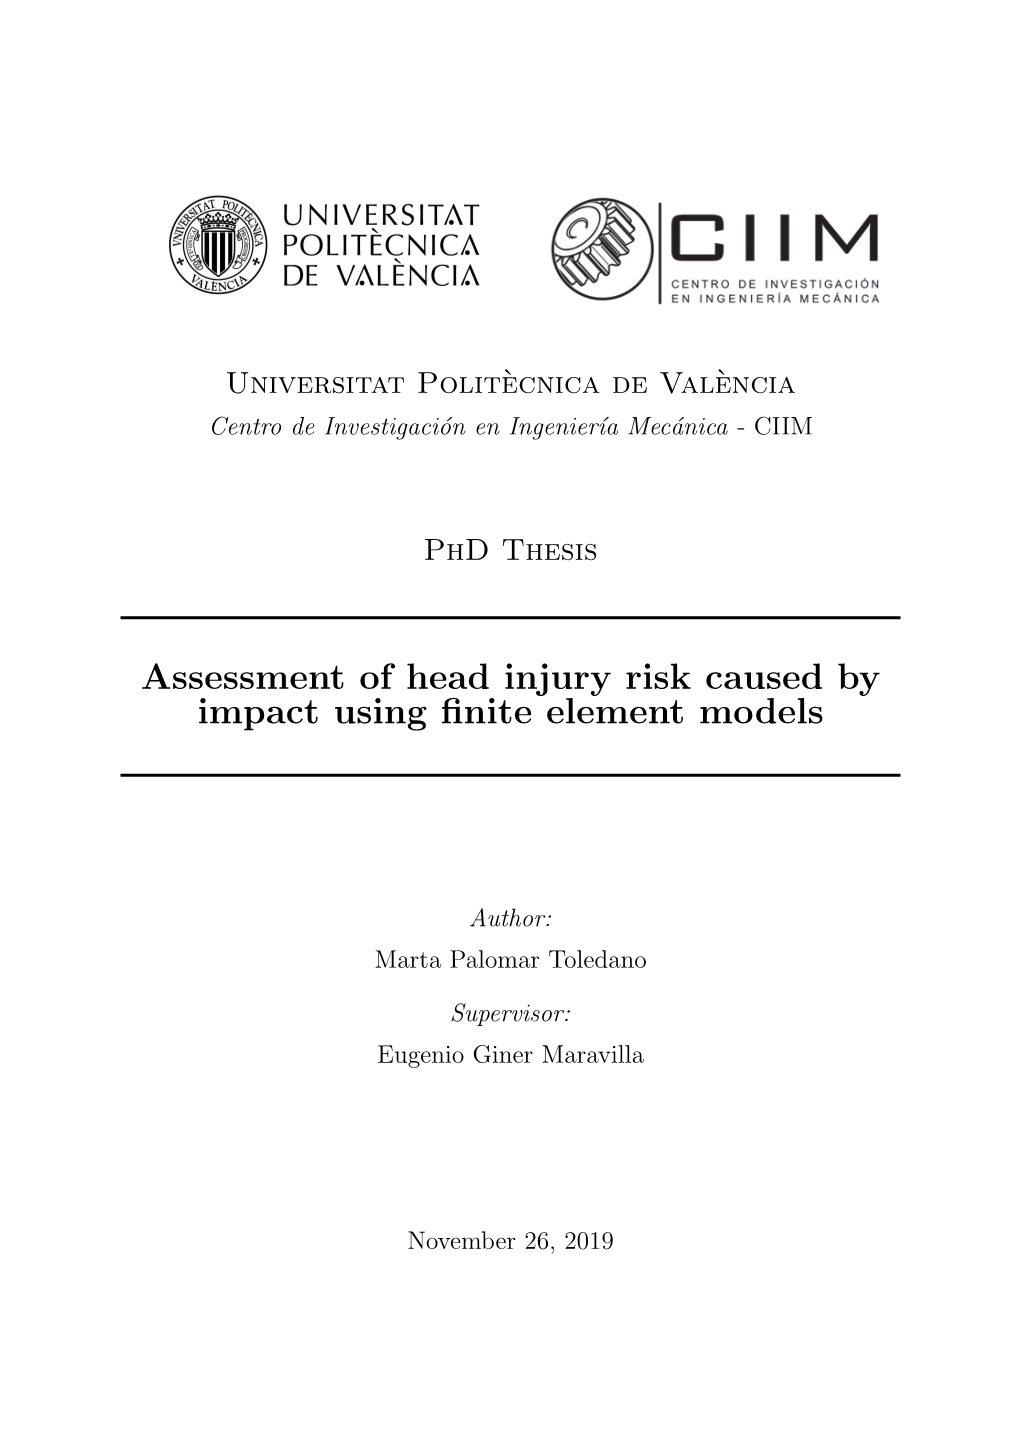 Assessment of Head Injury Risk Caused by Impact Using Finite Element